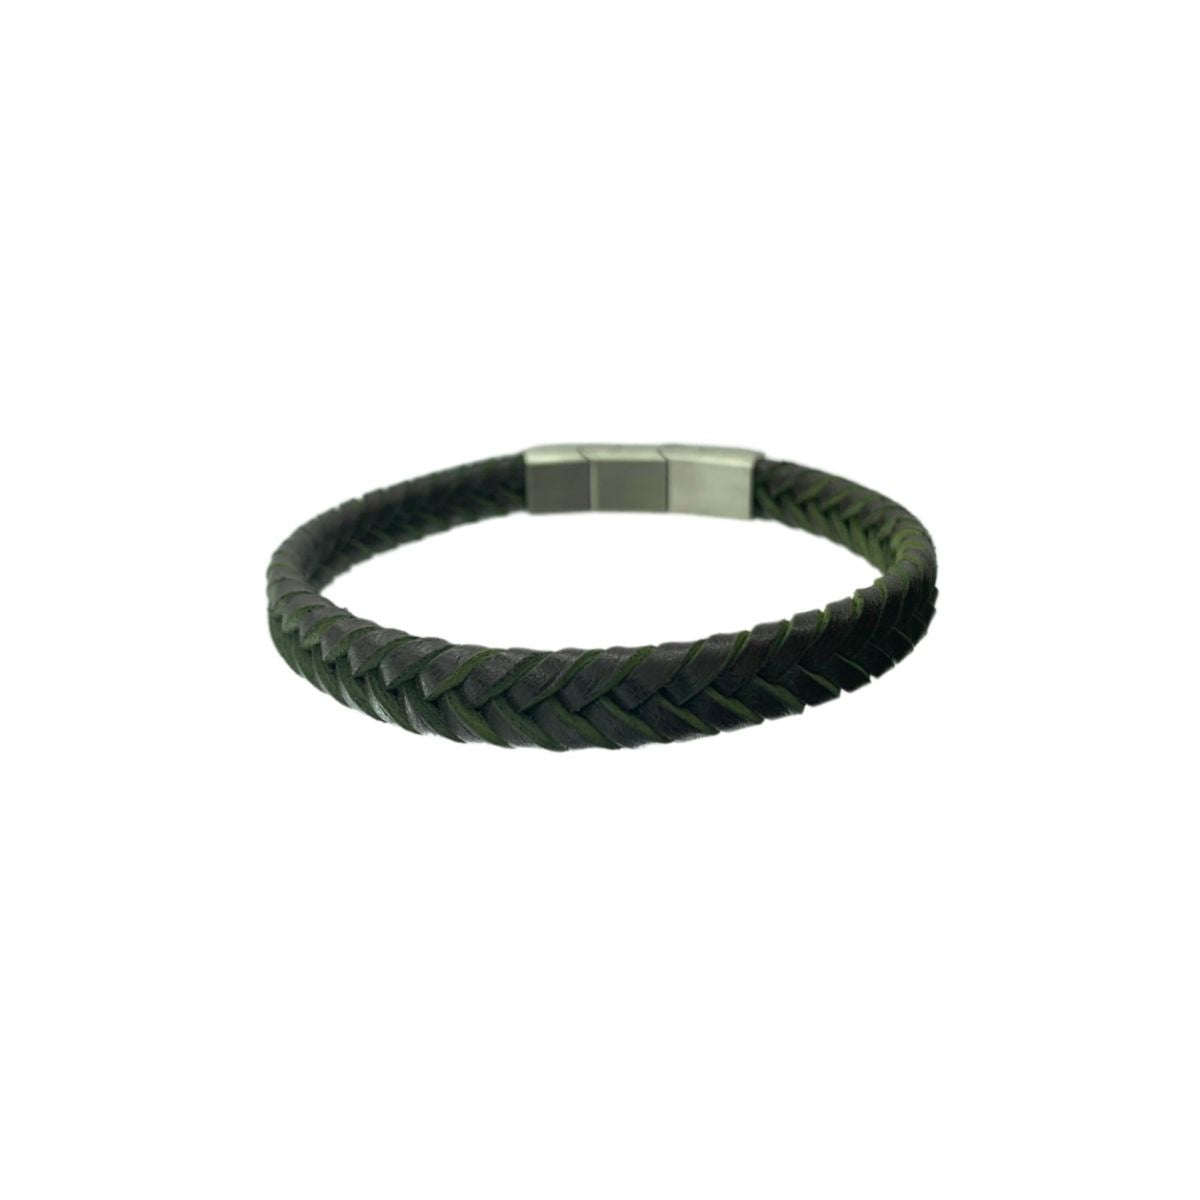 BROWN AND GREEN TWO-TONE LEATHER BRACELET